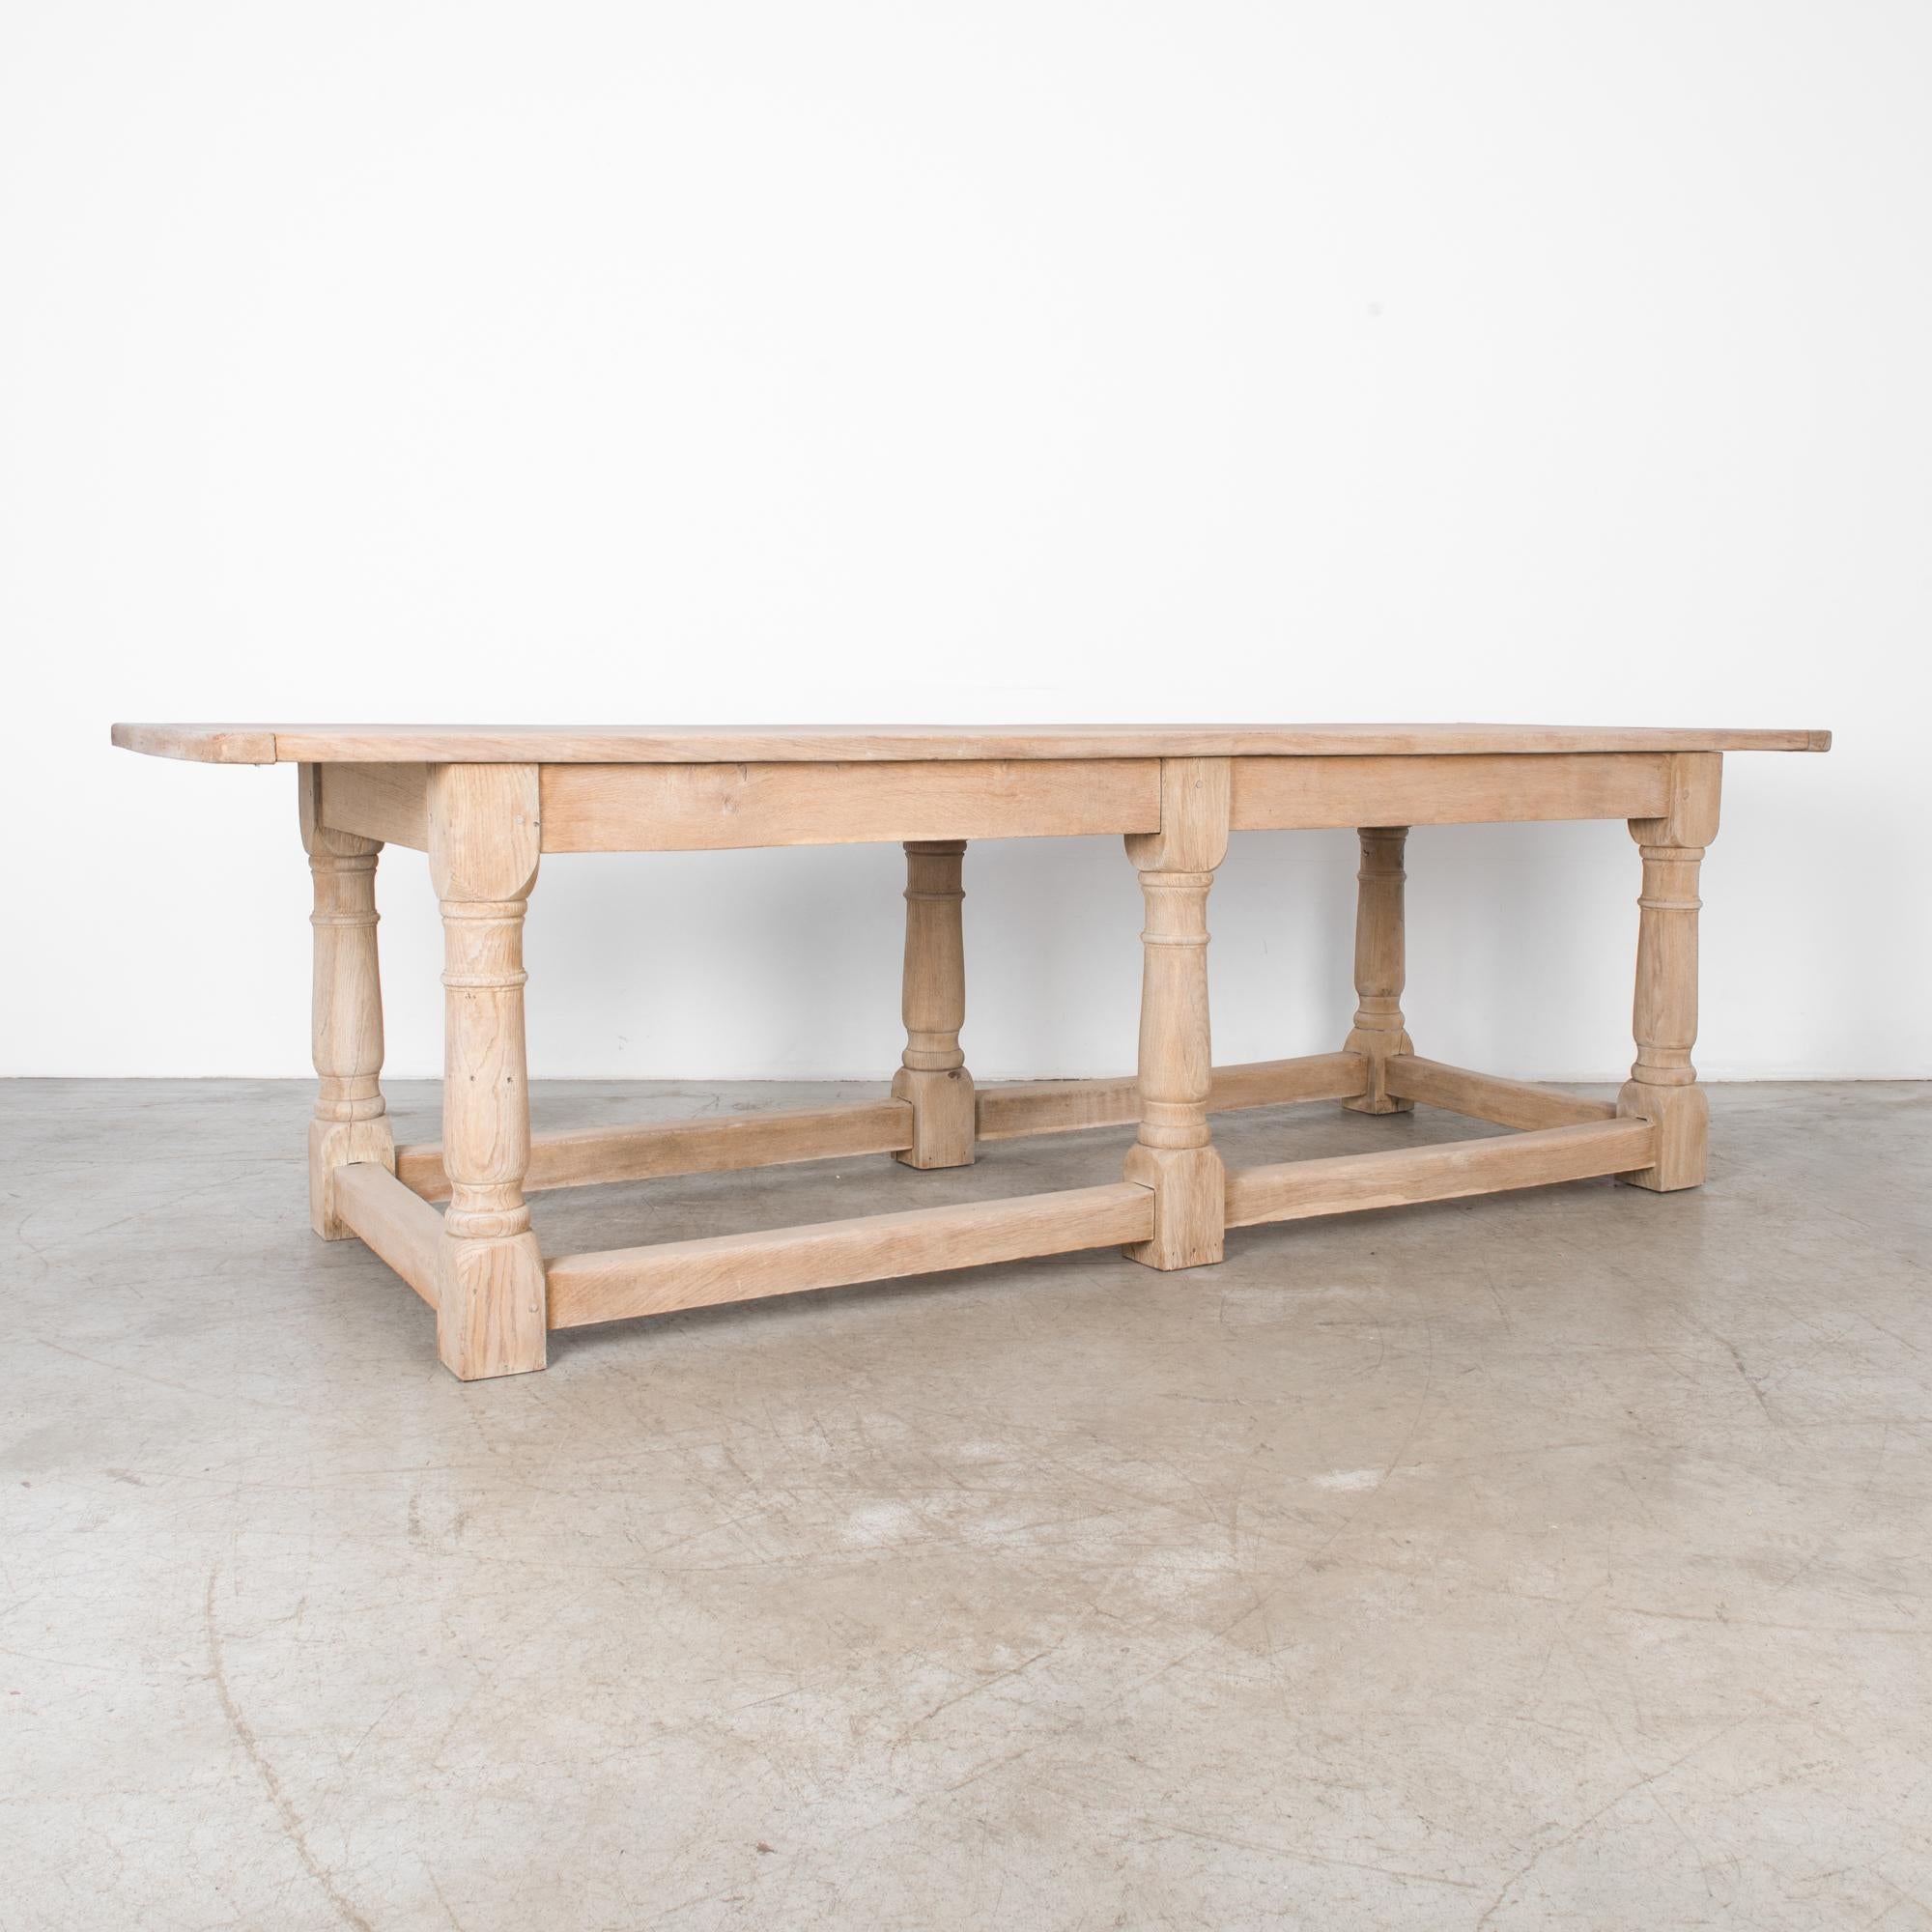 A Classic dining table from Luxembourg, circa 1940. Thick apron and legs give this oak table and extremely sturdy feel. Robust turned legs, and stretcher bars ensure this table will withstand frequent feasting. Refinished with natural oils to